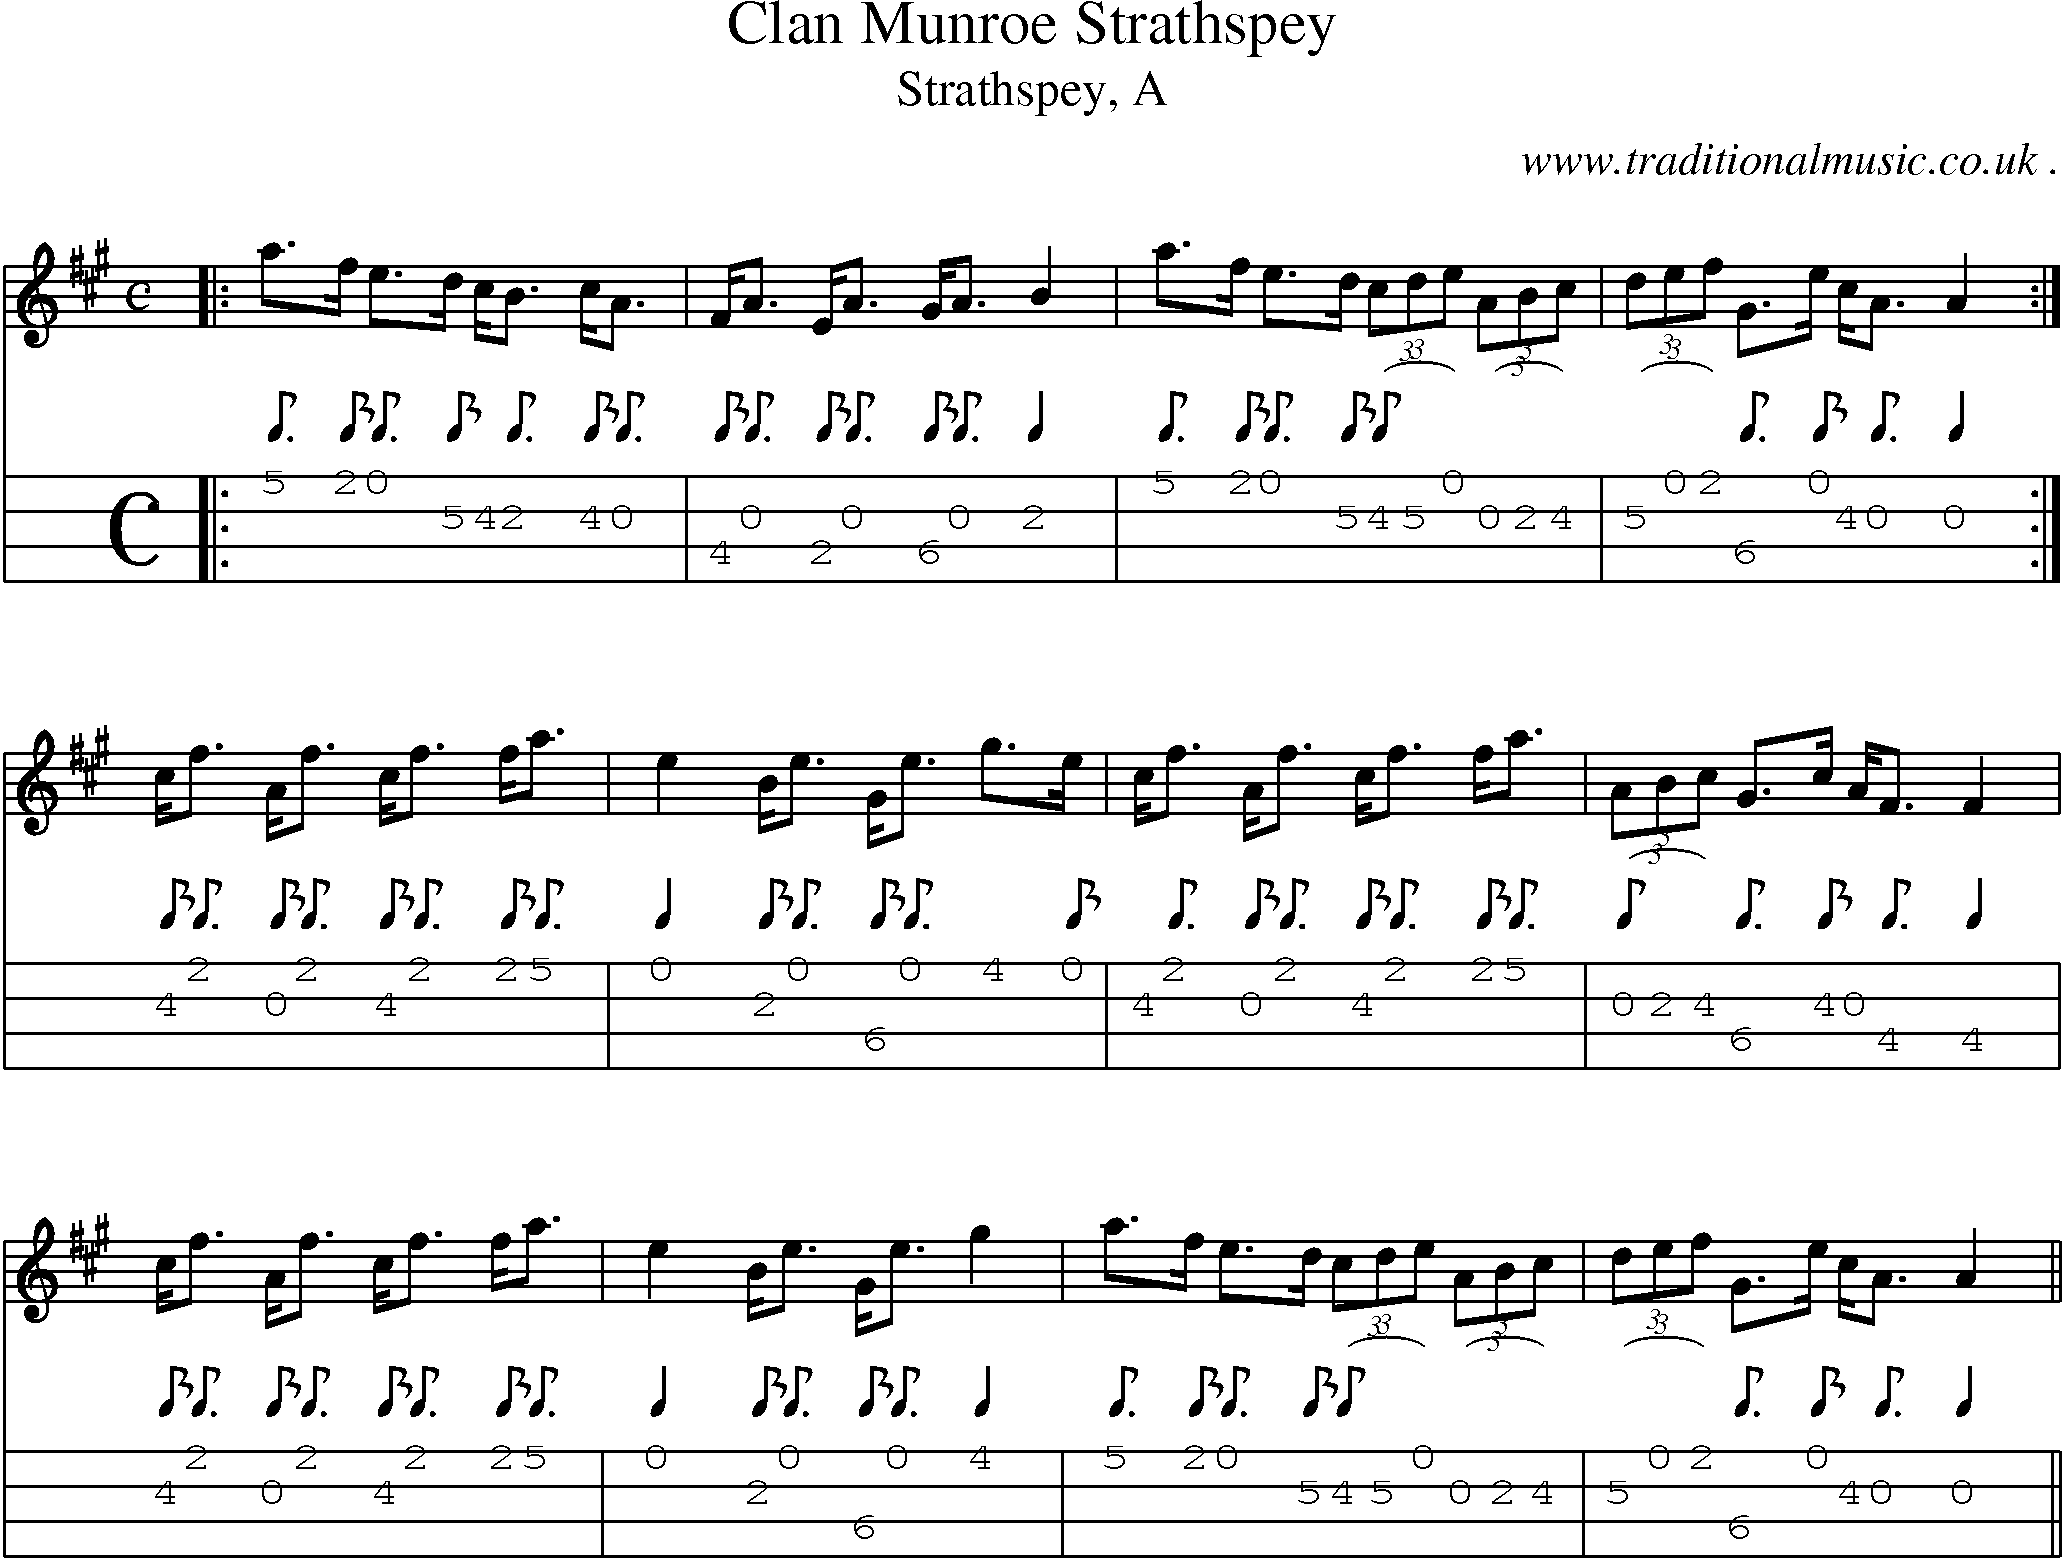 Sheet-music  score, Chords and Mandolin Tabs for Clan Munroe Strathspey